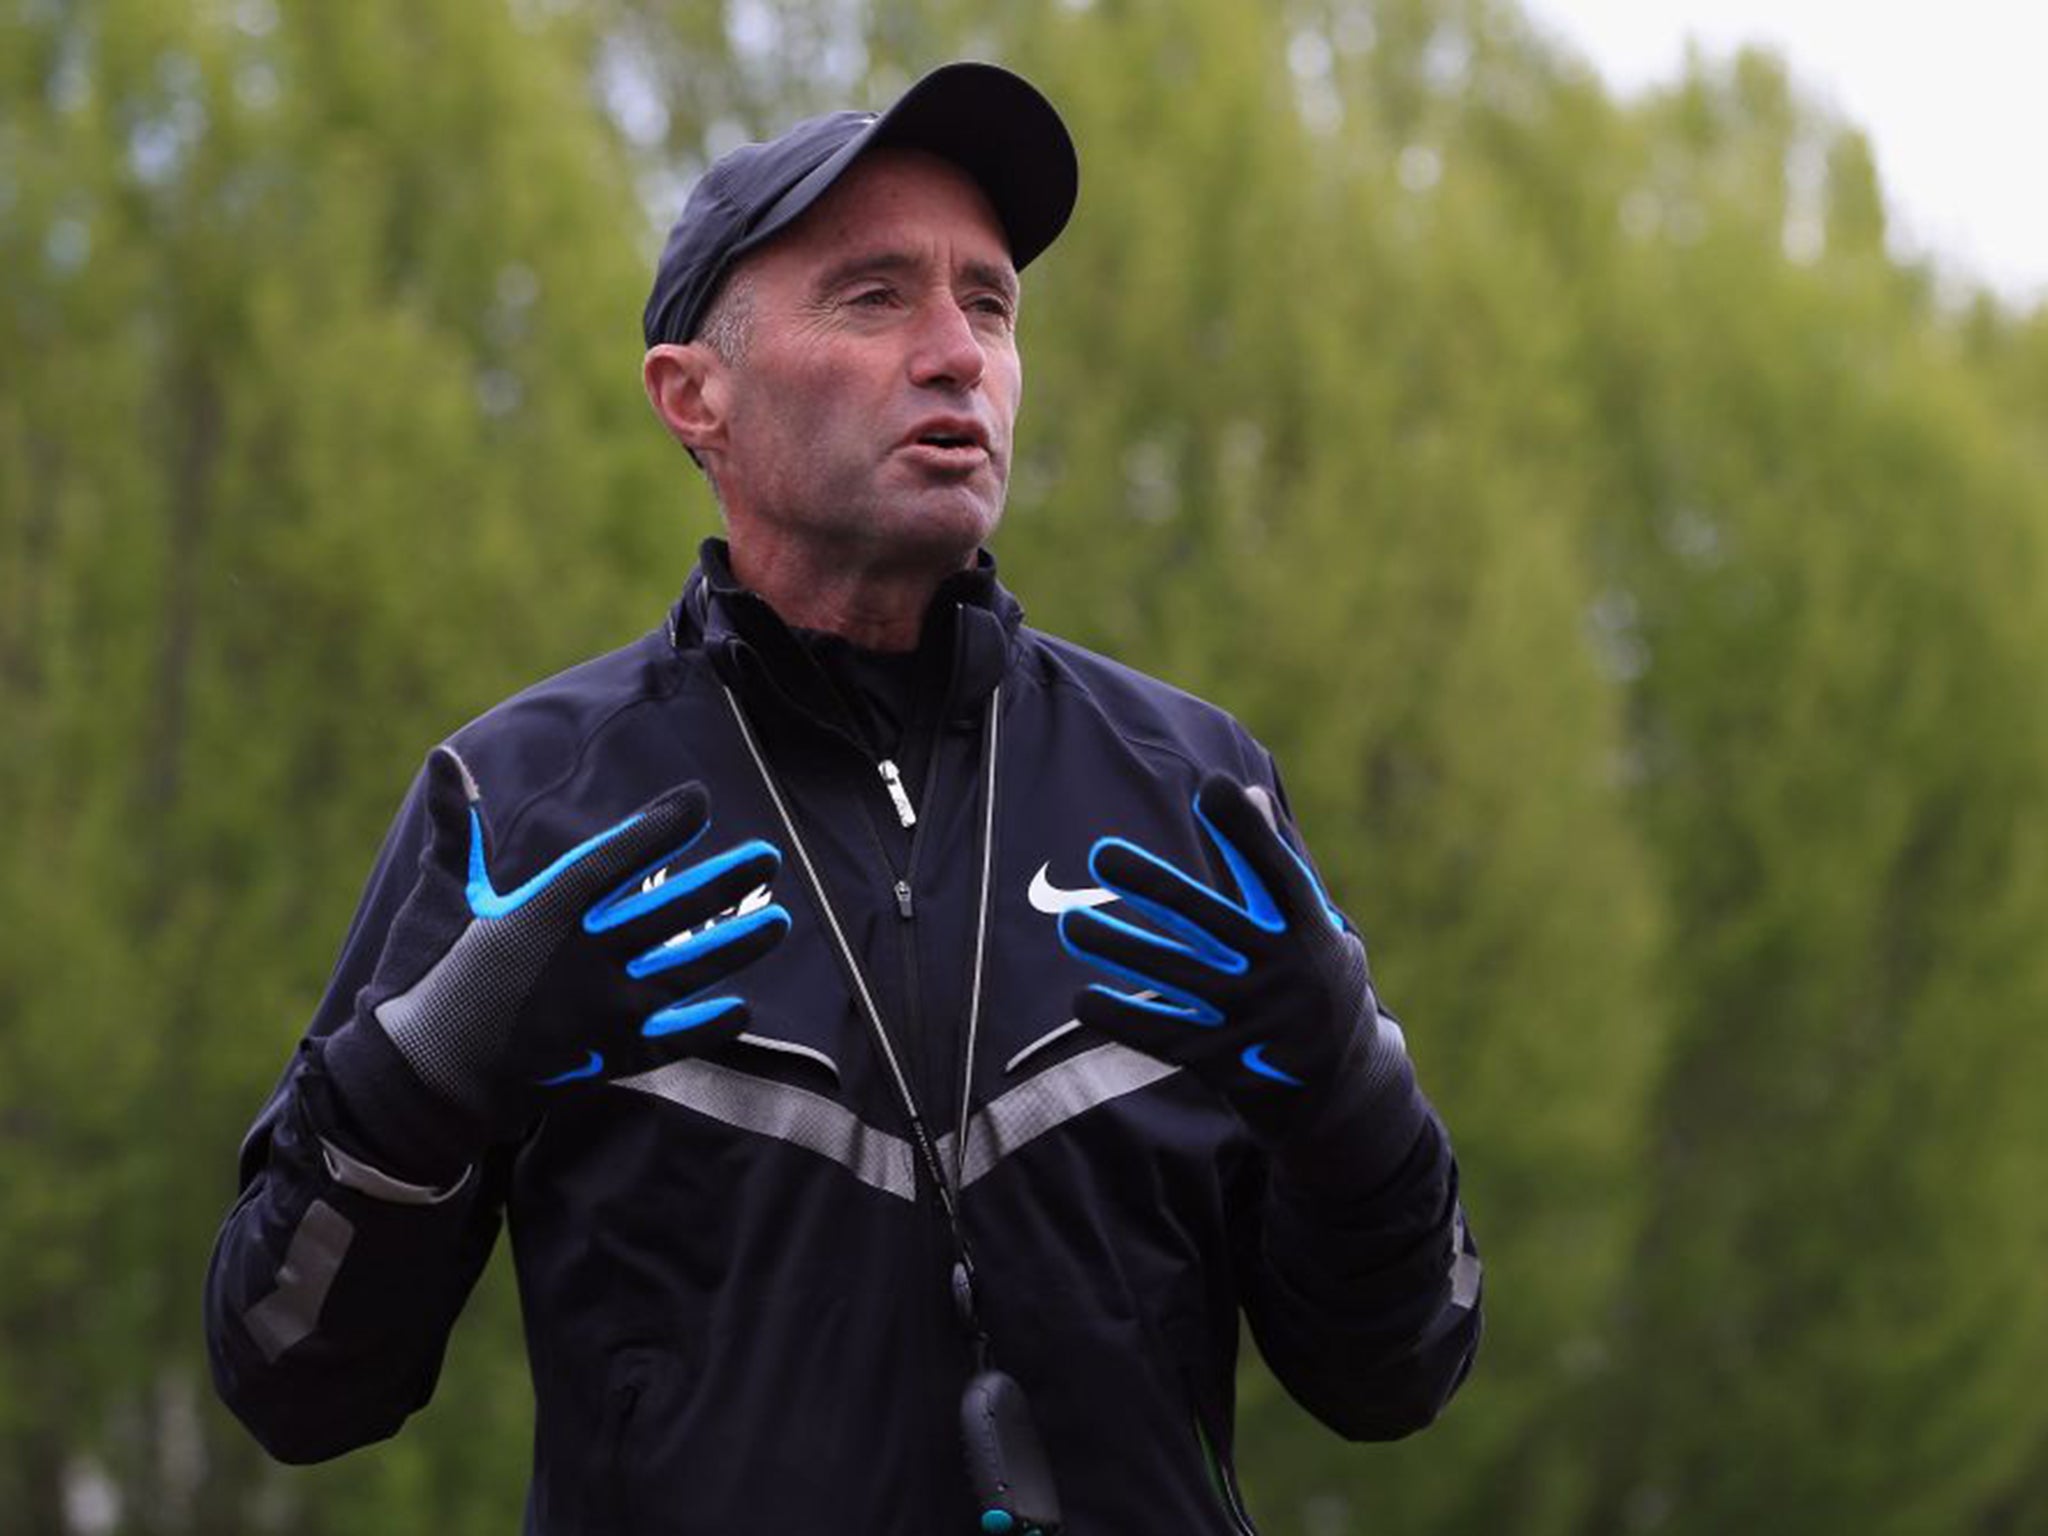 Alberto Salazar is expected to make a detailed response to Panorama’s allegations on Tuesday